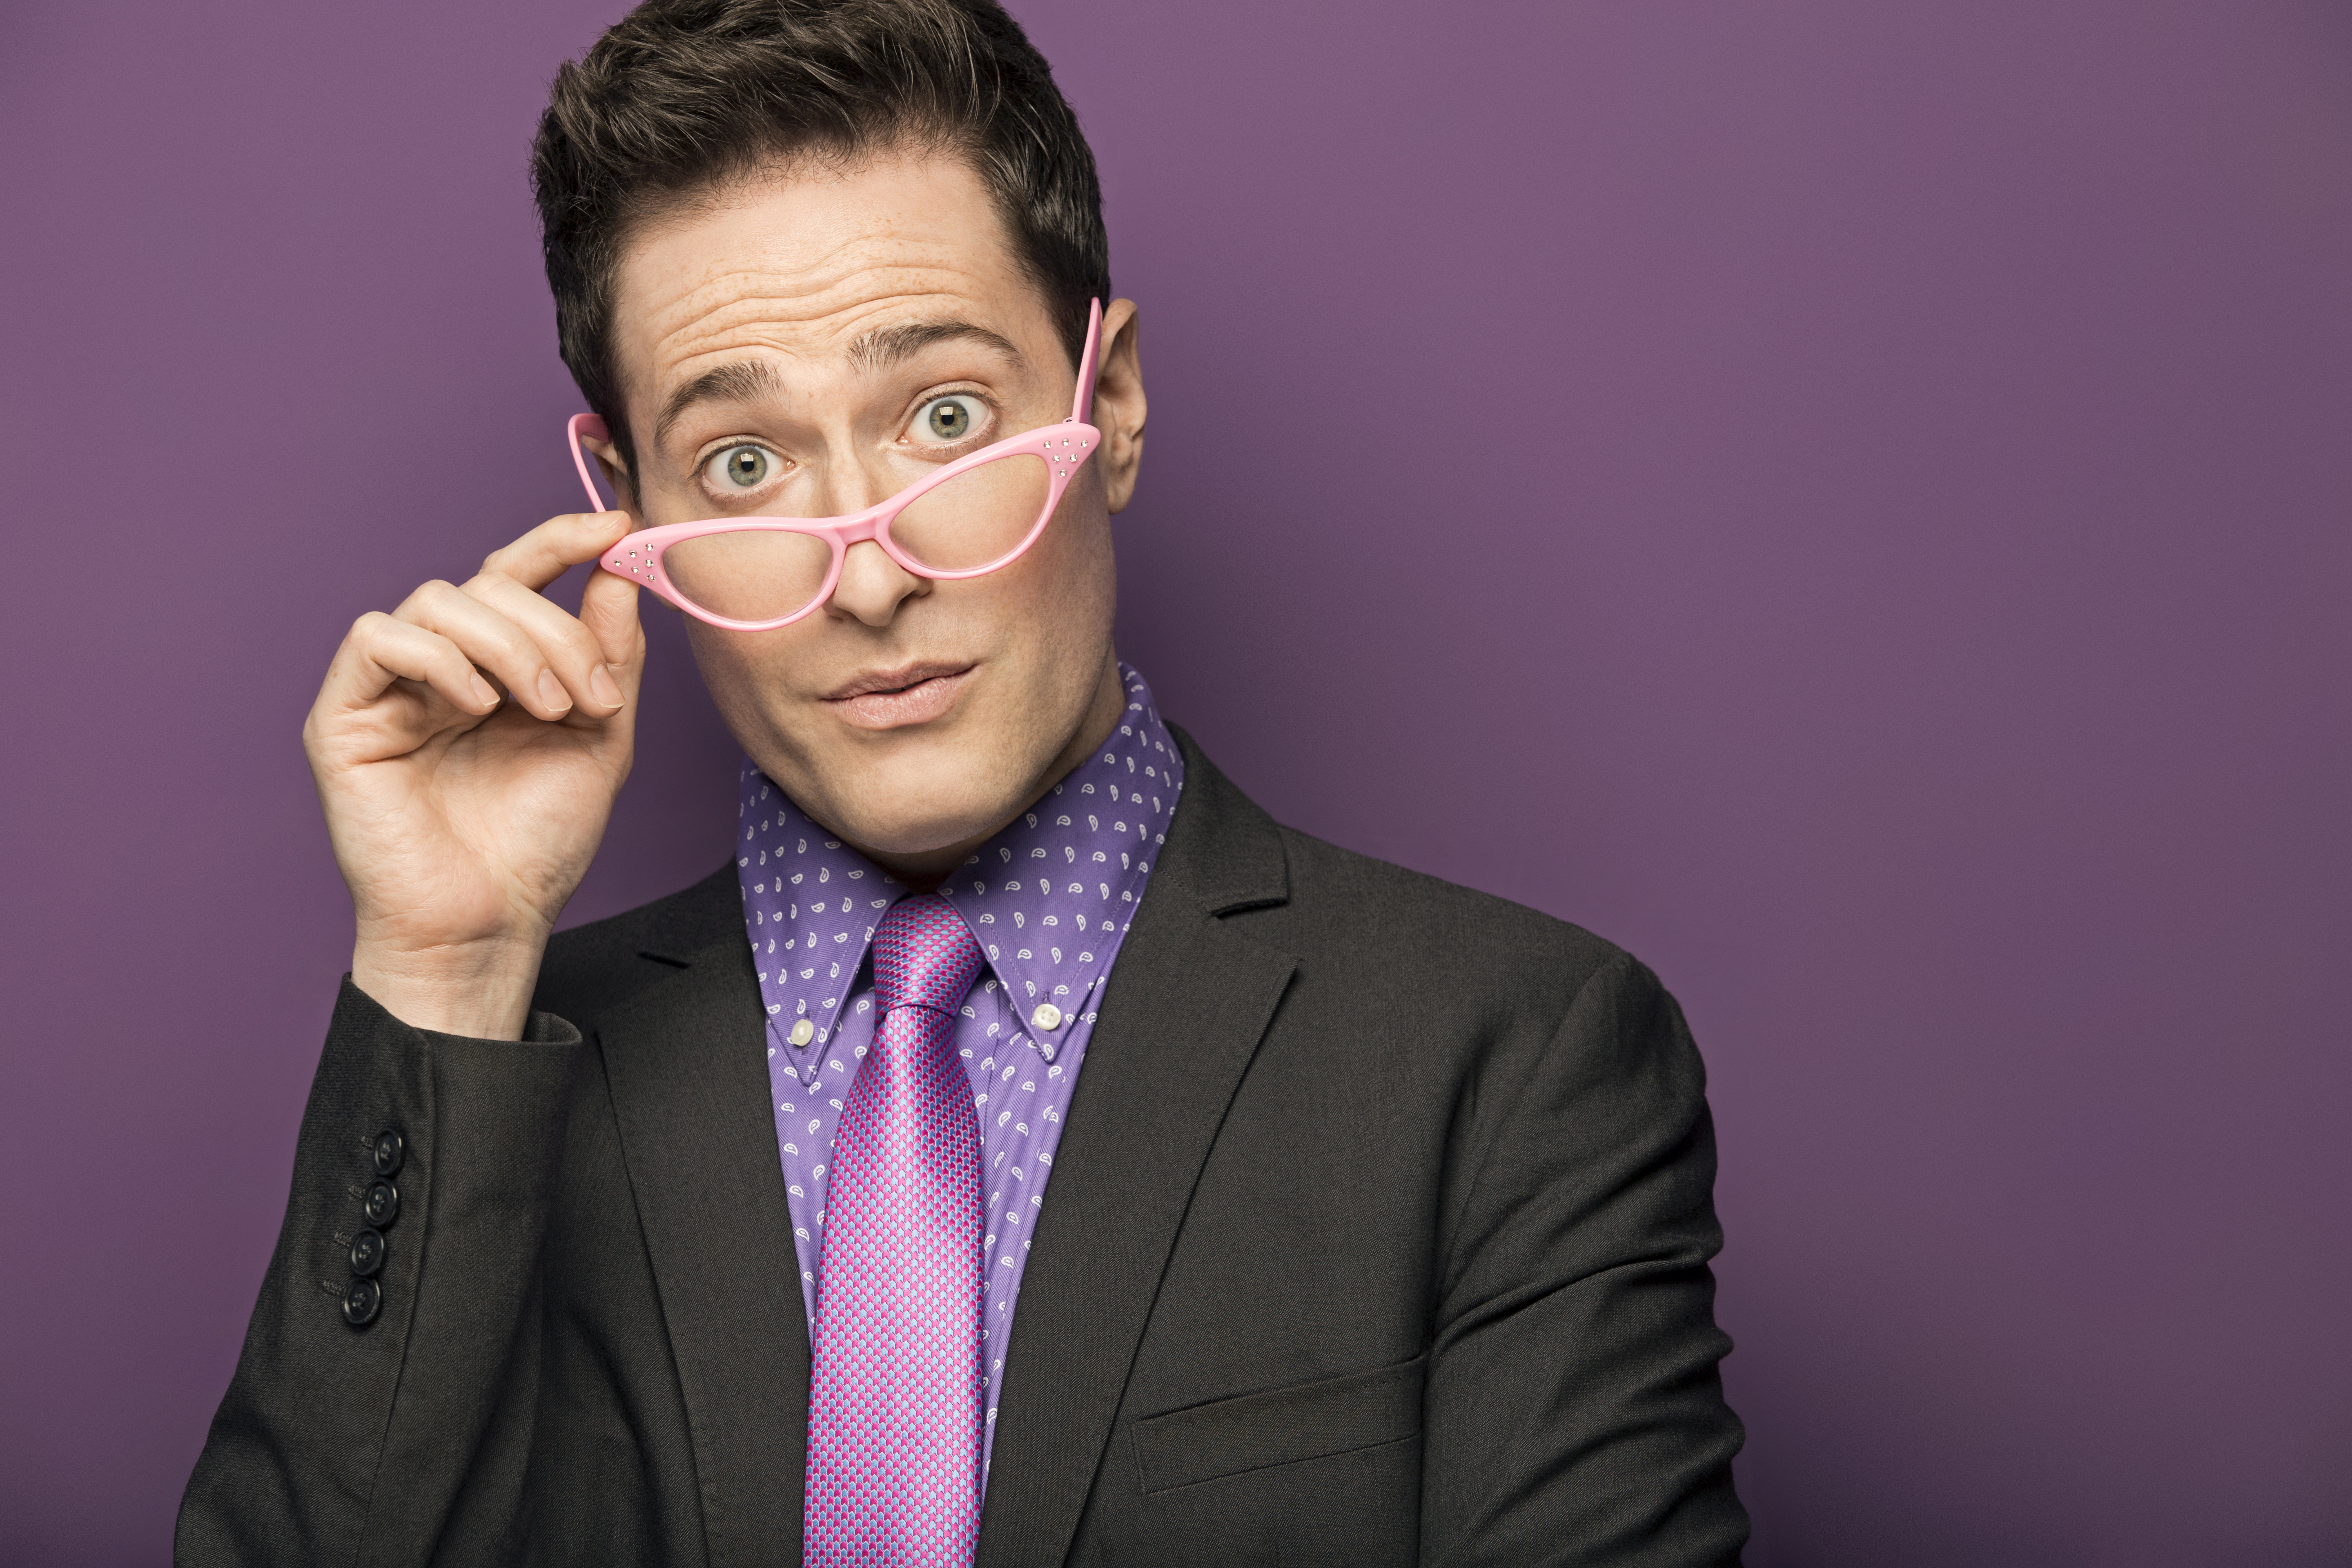 Valley Advocate Q&A with YouTube star and political song parodist Randy Rainbow